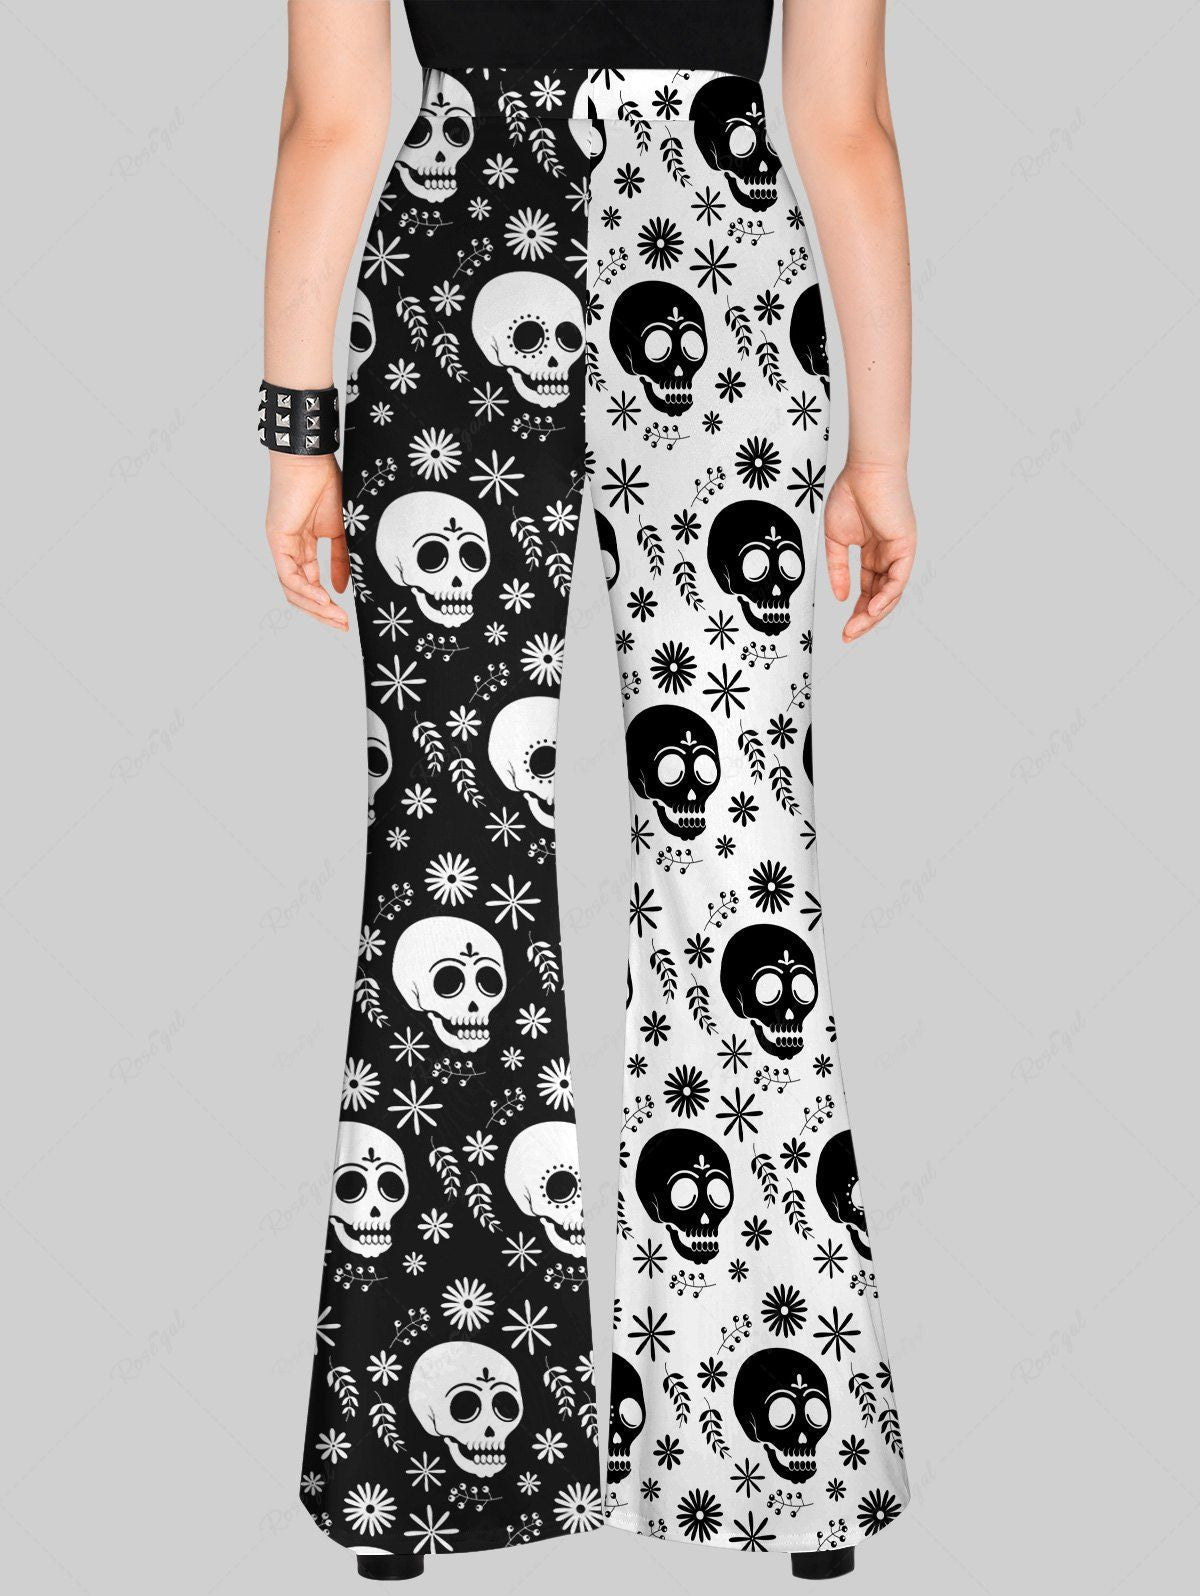 Gothic Skulls Floral Print Two Tone Colorblock Patchwork Pull On Flare Pants